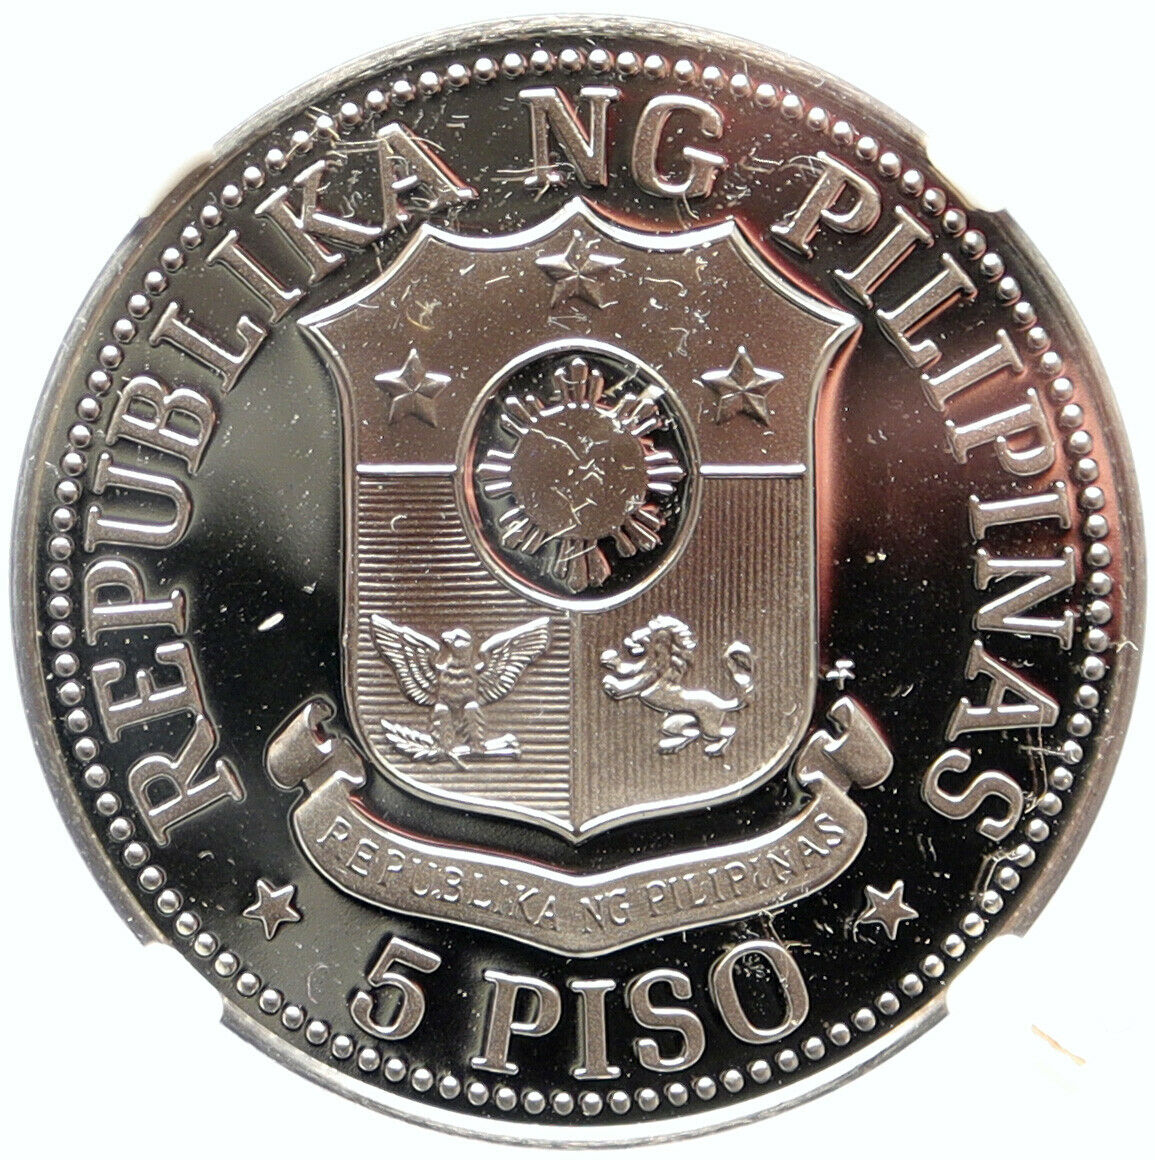 1976 PHILIPPINES New Society MARCOS Lipunan VINTAGE Proof 5 Piso Coin NGC i99626